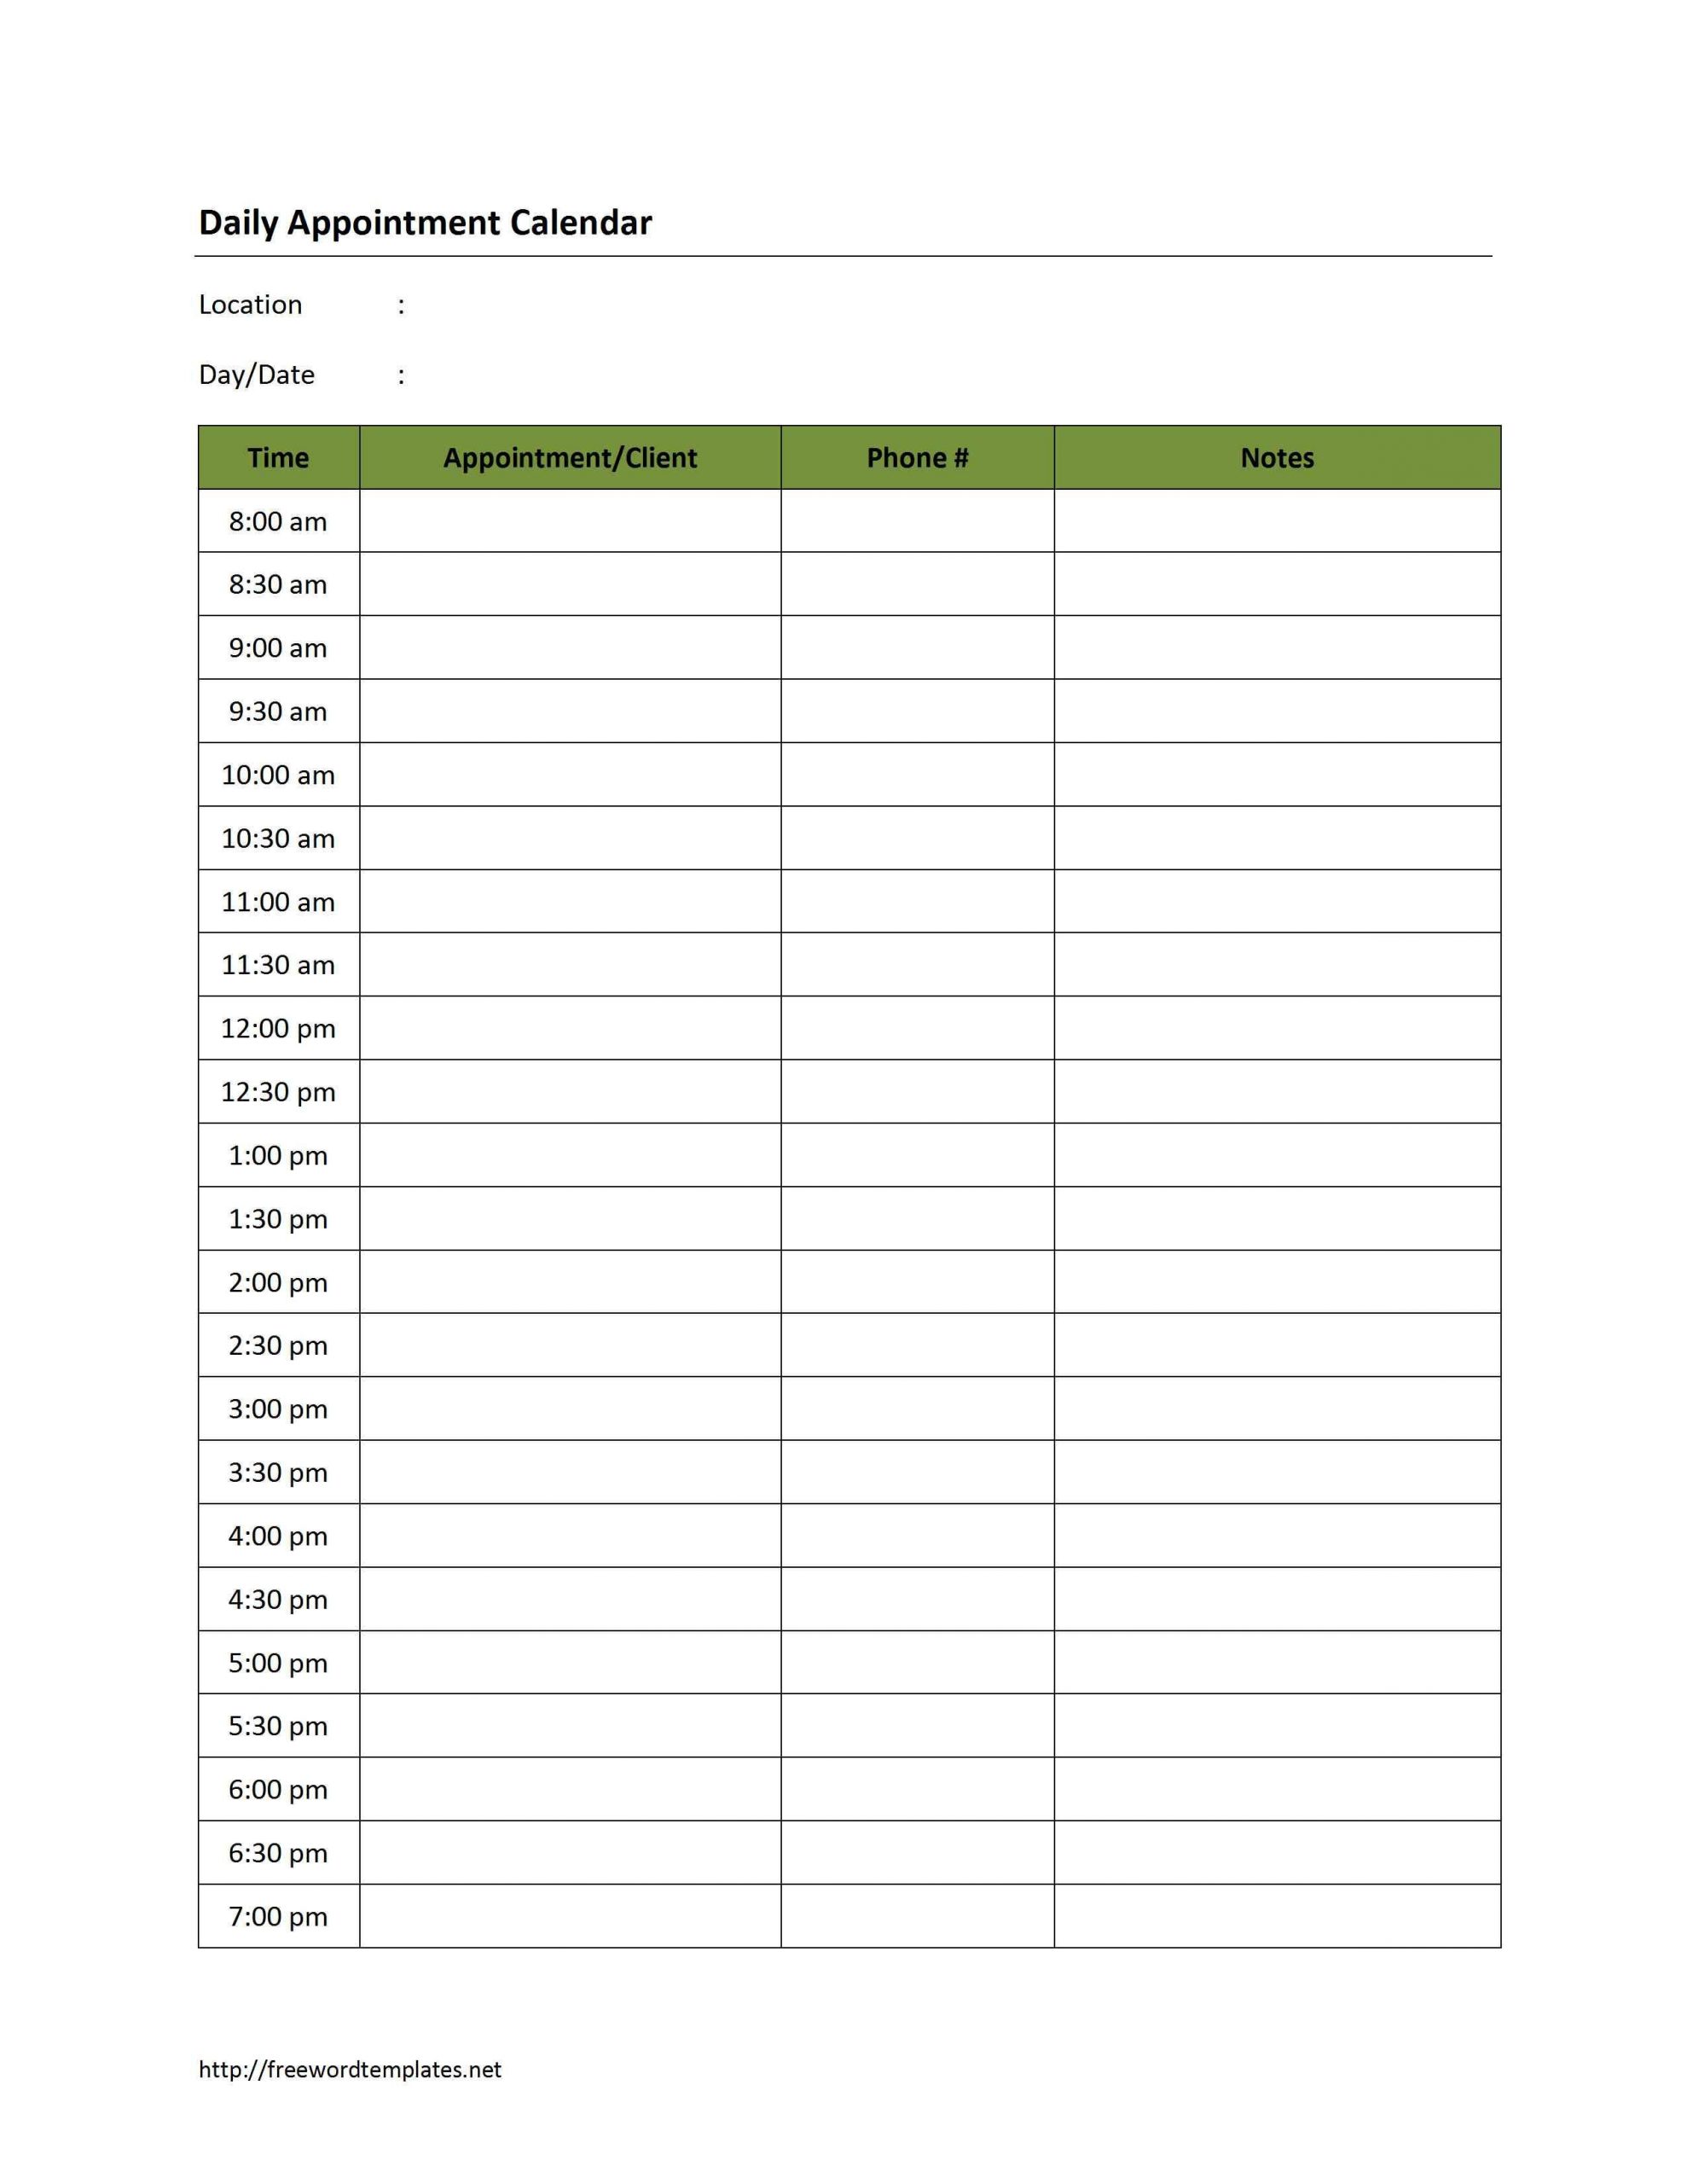 Daily Appointment Calendar Template Daily Appointment Calendar Template